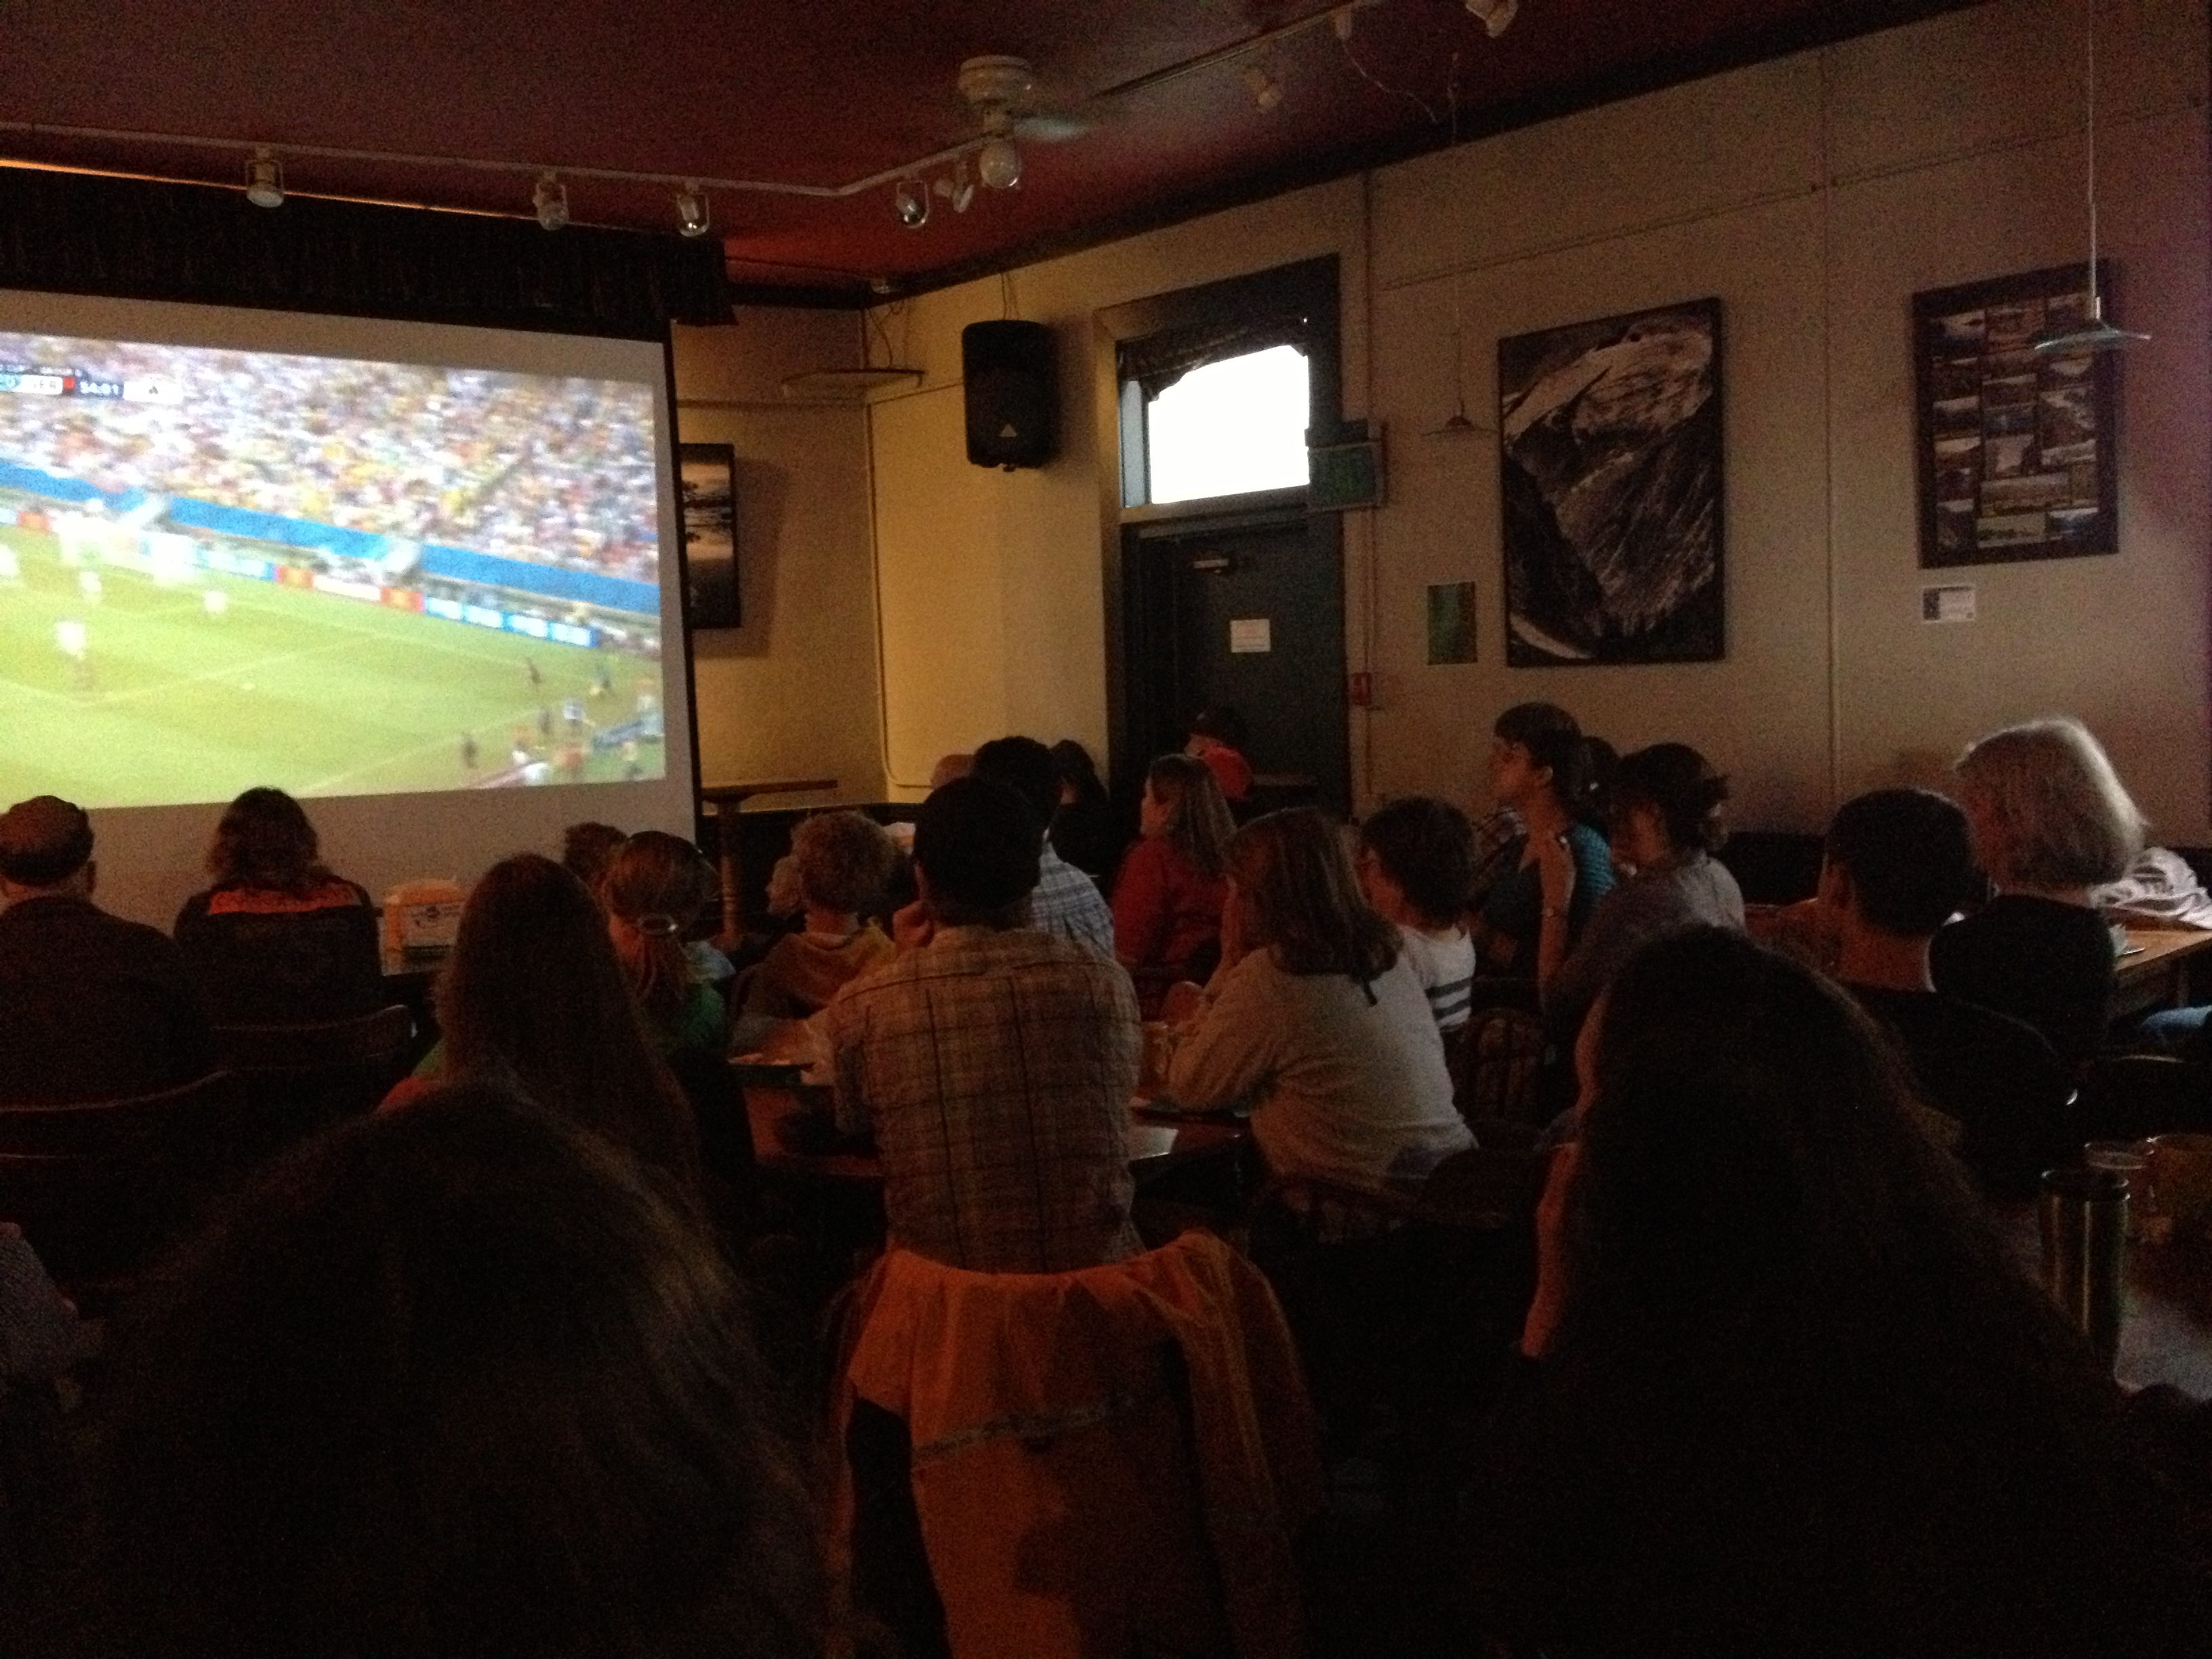 More than a hundred people watched the USA-Germany match of the FIFA World Cup Thursday morning at Silverbow Bakery. (Photo by Lisa Phu/KTOO)